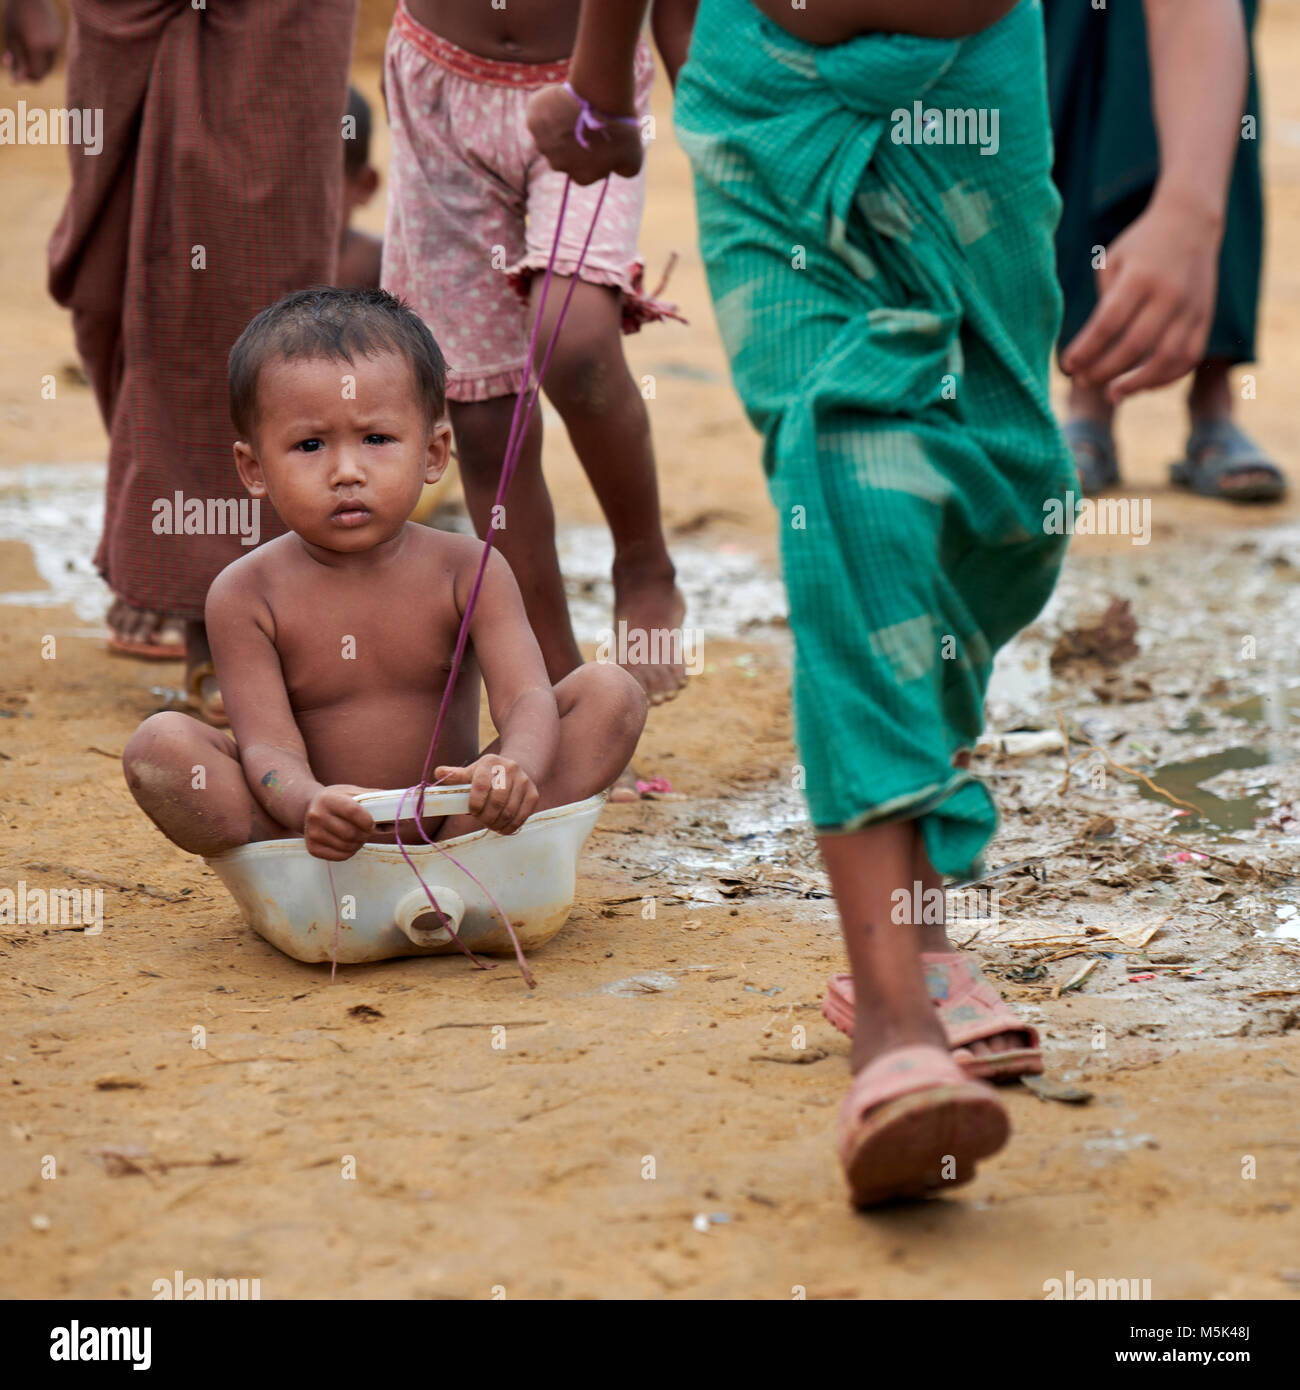 A Rohingya refugee child holds on tight as another child pulls them along the dirt street in the sprawling Kutupalong Refugee Camp in Bangladesh. Stock Photo